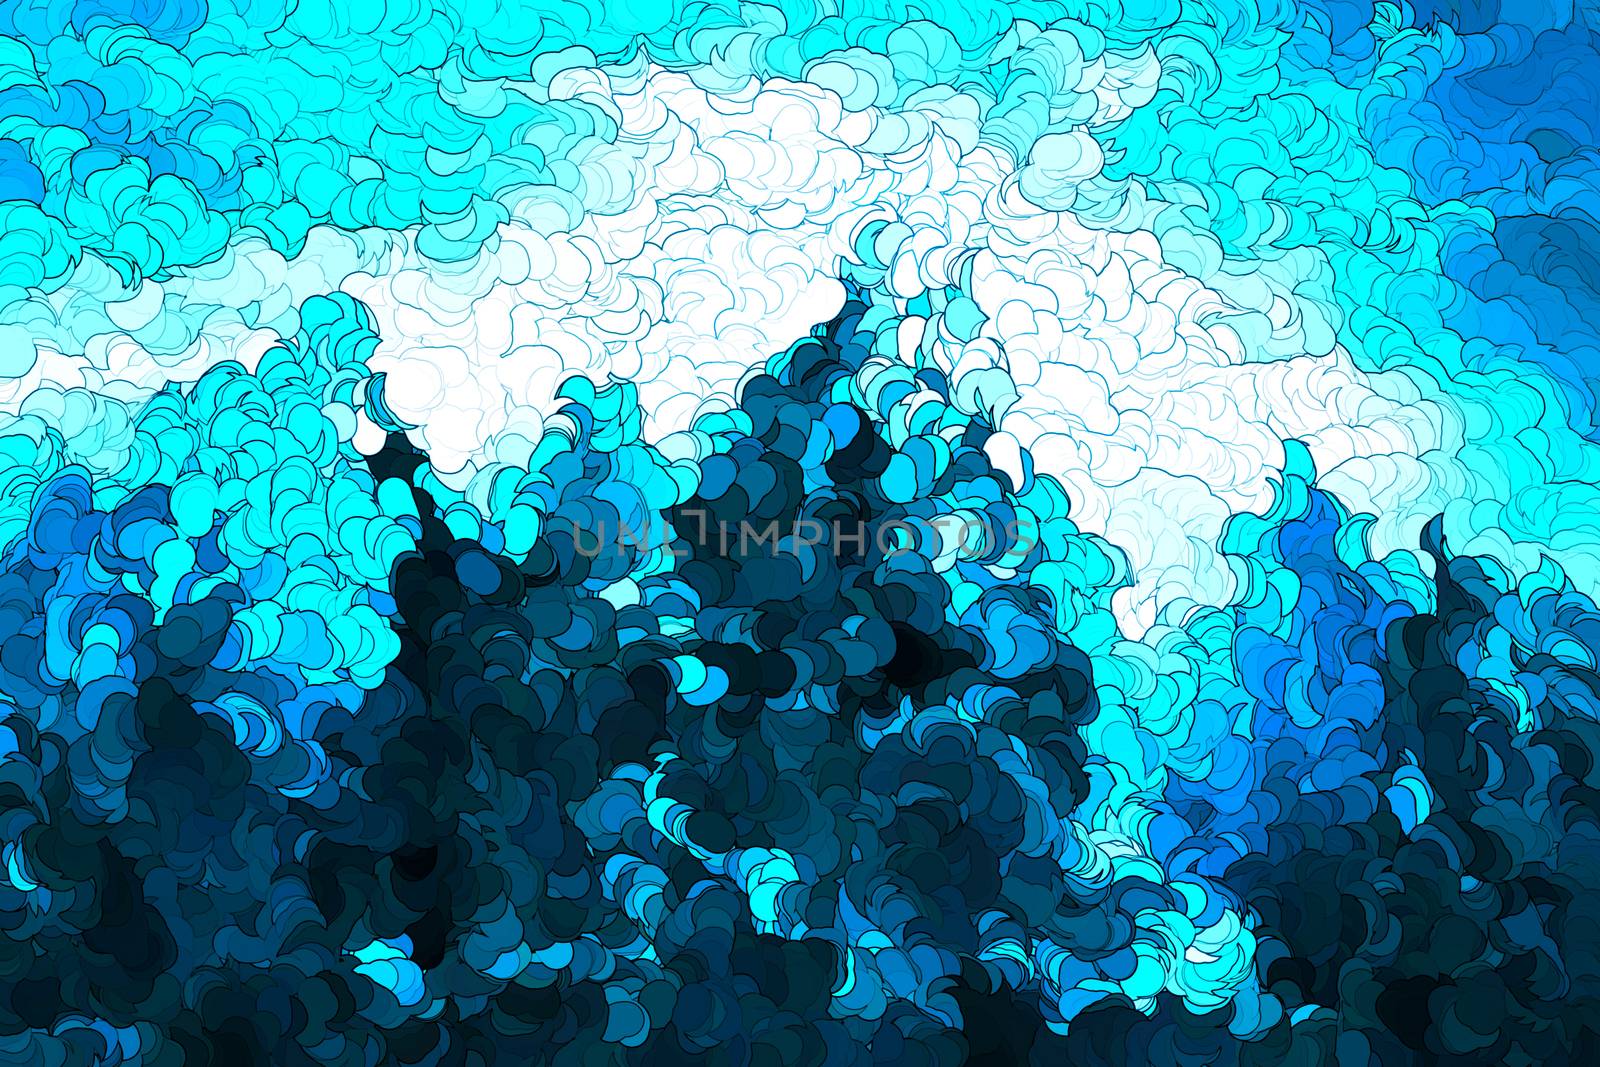 Abstract painting of seaweeds, which can be use as background, backdrop or design etc.